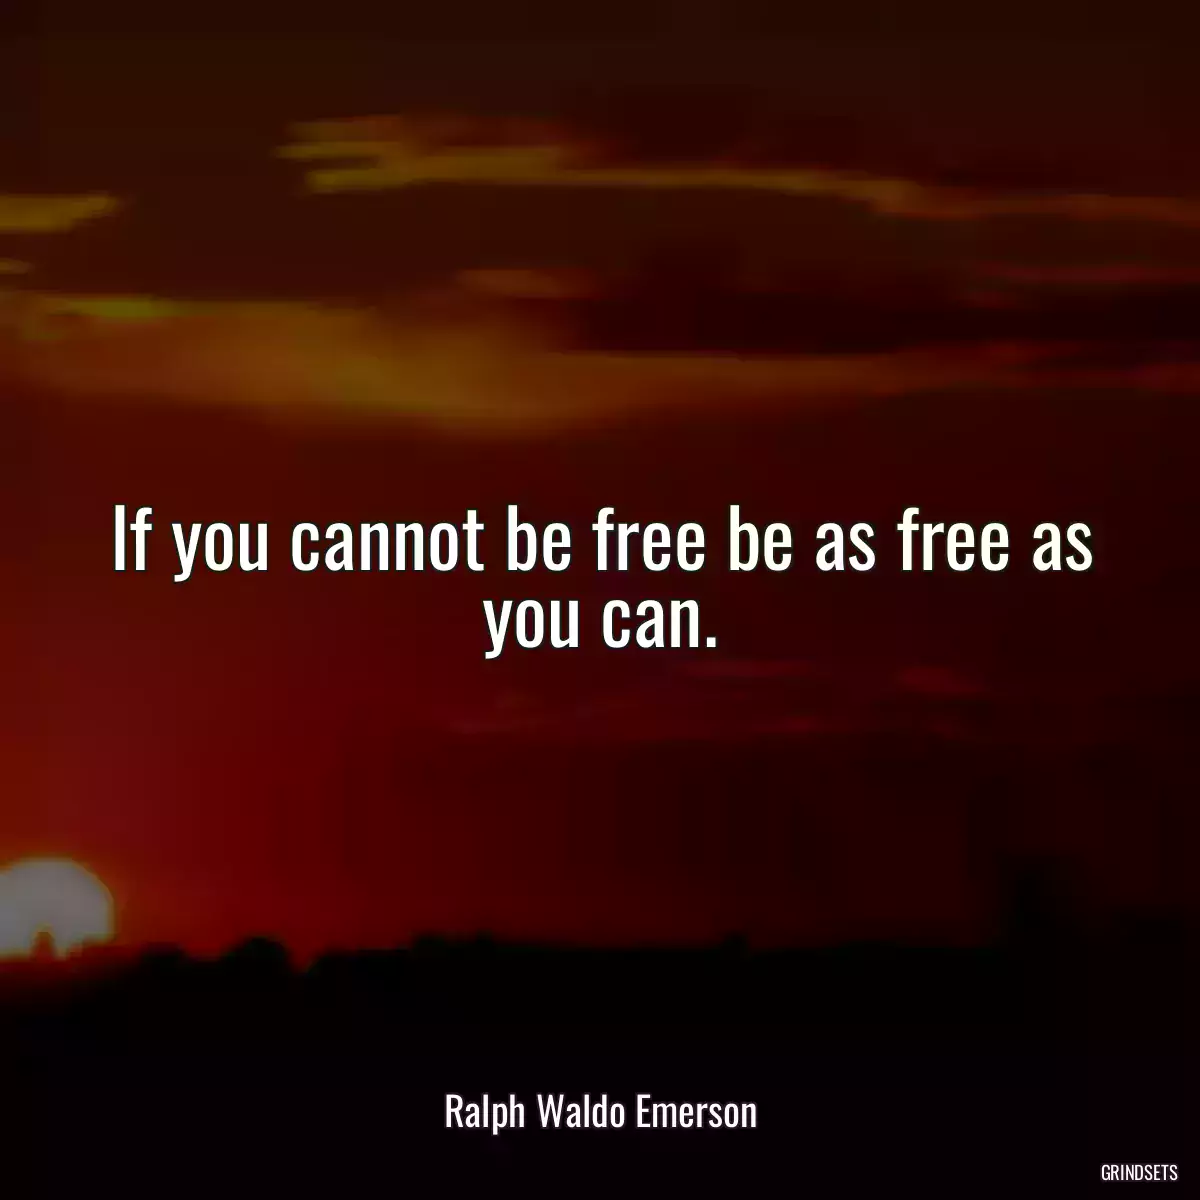 If you cannot be free be as free as you can.